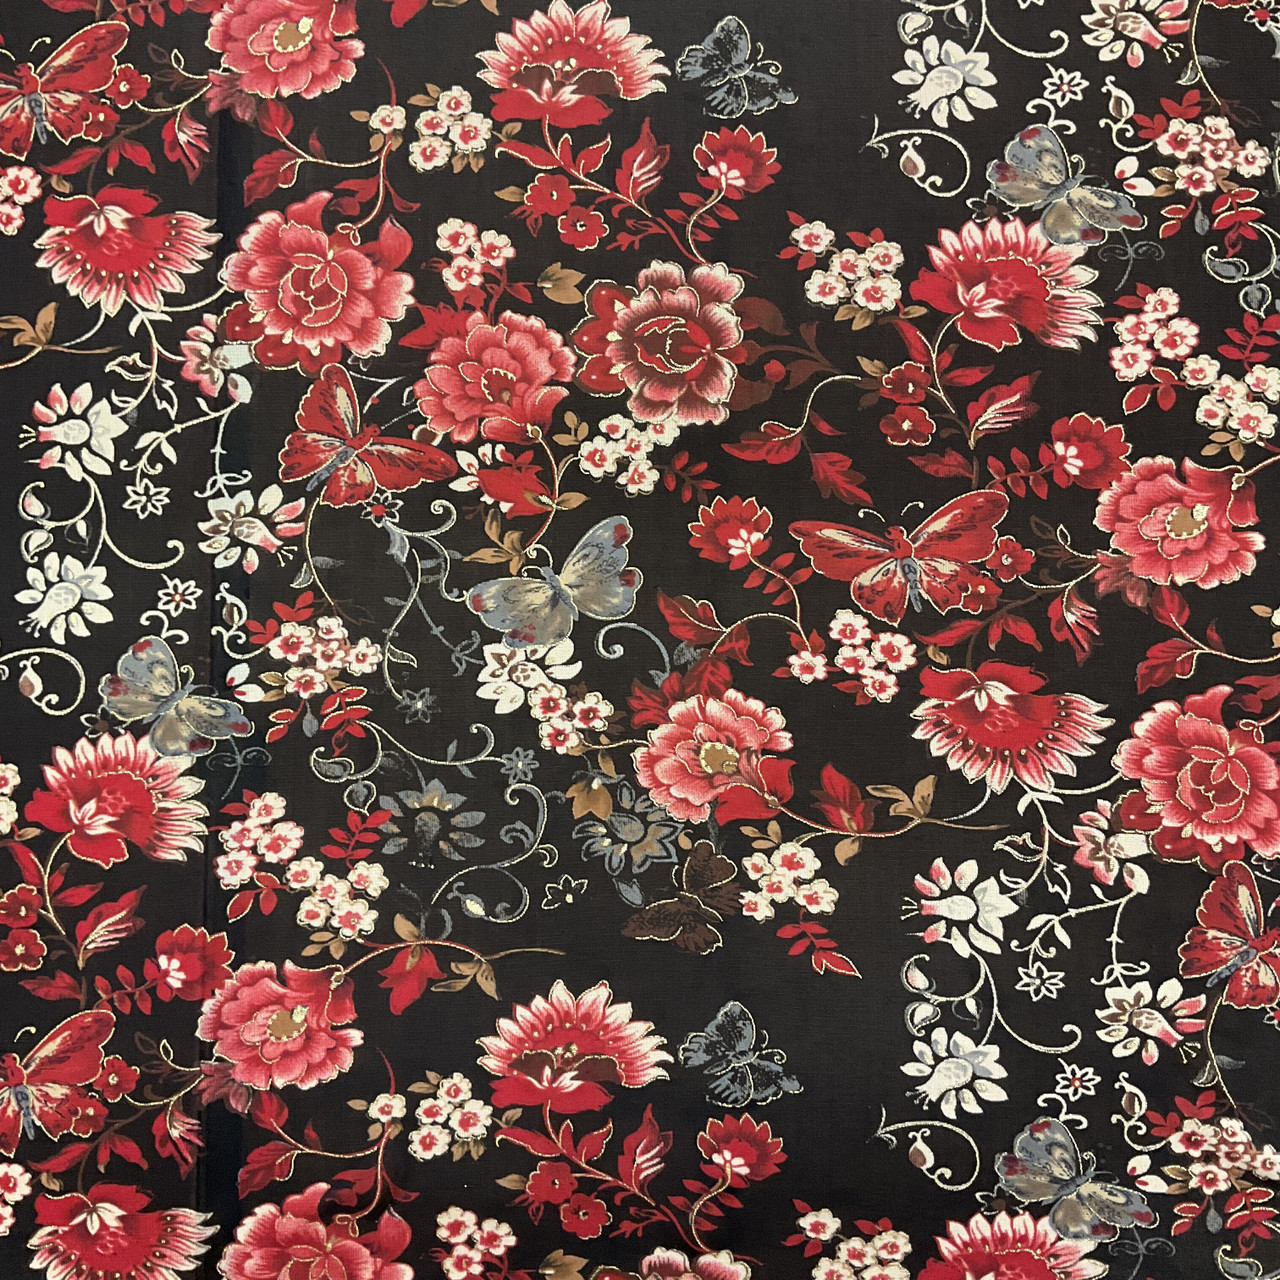 Red and Black Floral Printed Sheer Mesh Stretch Knit Fabric / Clothing and  Apparel / Sold by the Yard / 60 inch wide - Fabric Warehouse